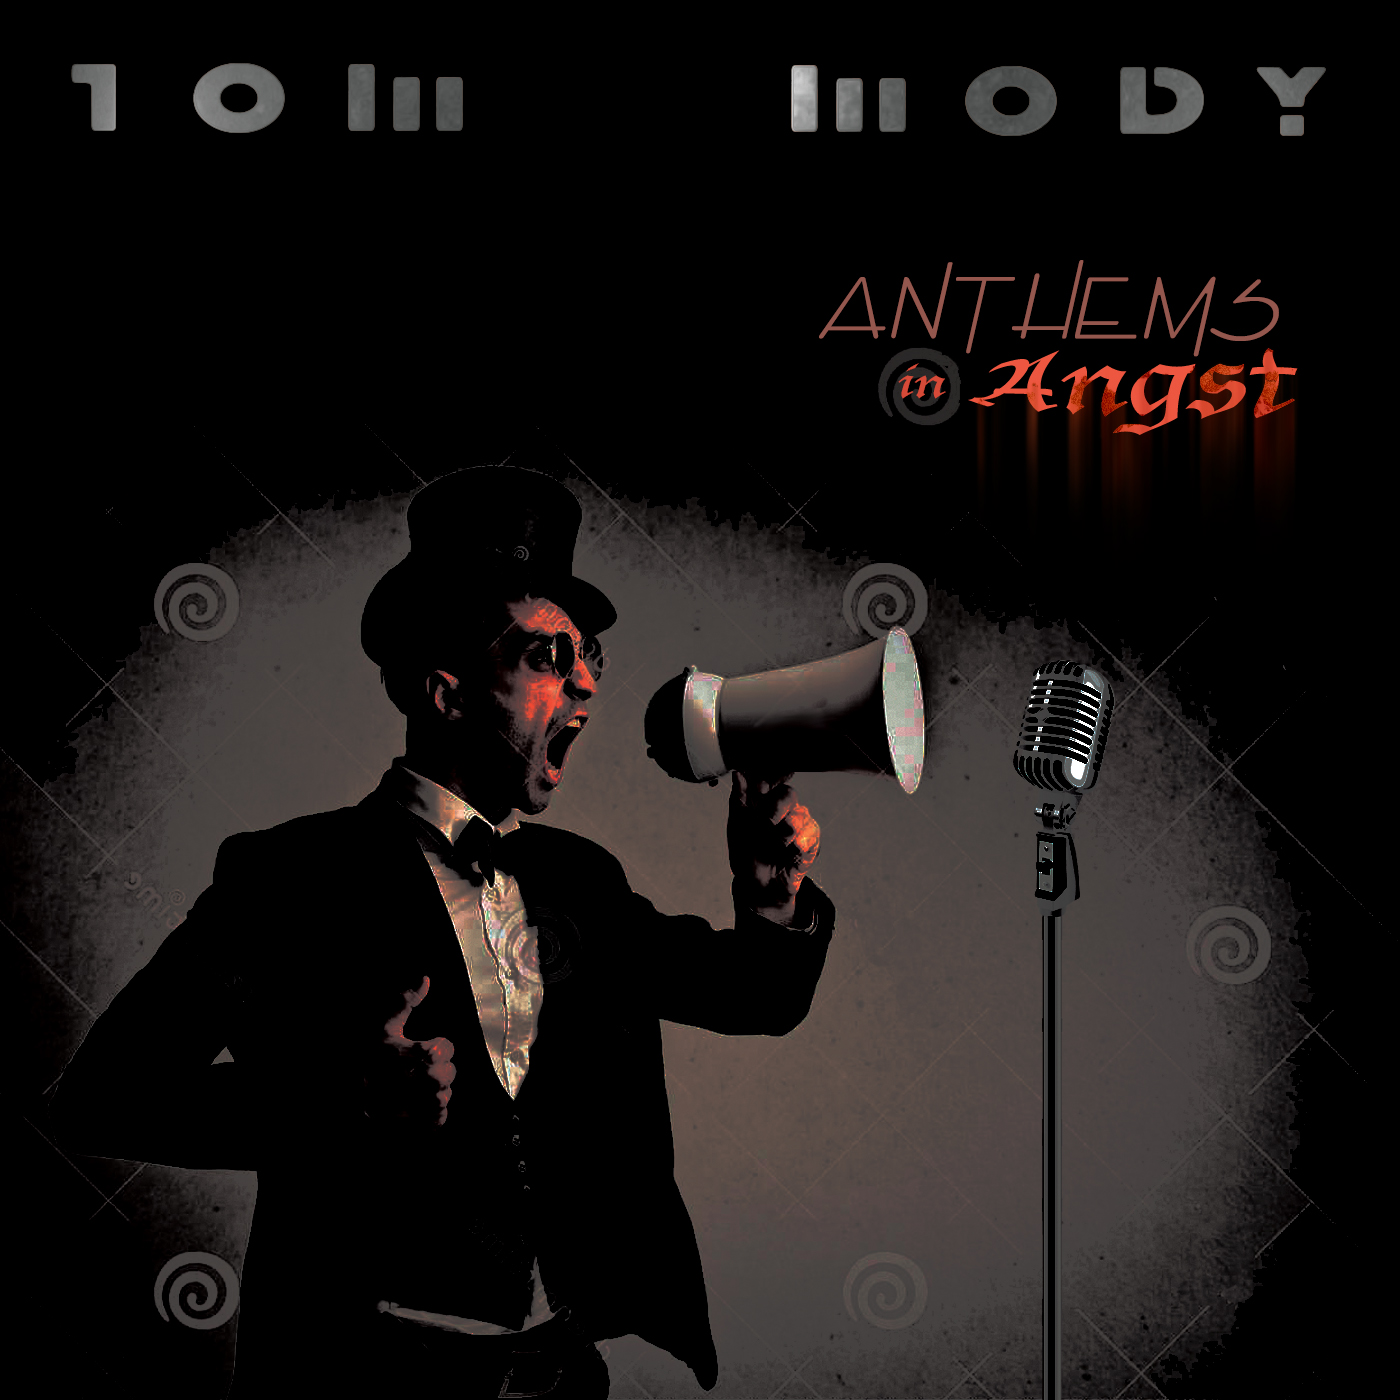 The heavy metal album Anthems in Angst by writer, producer Tom Mody.